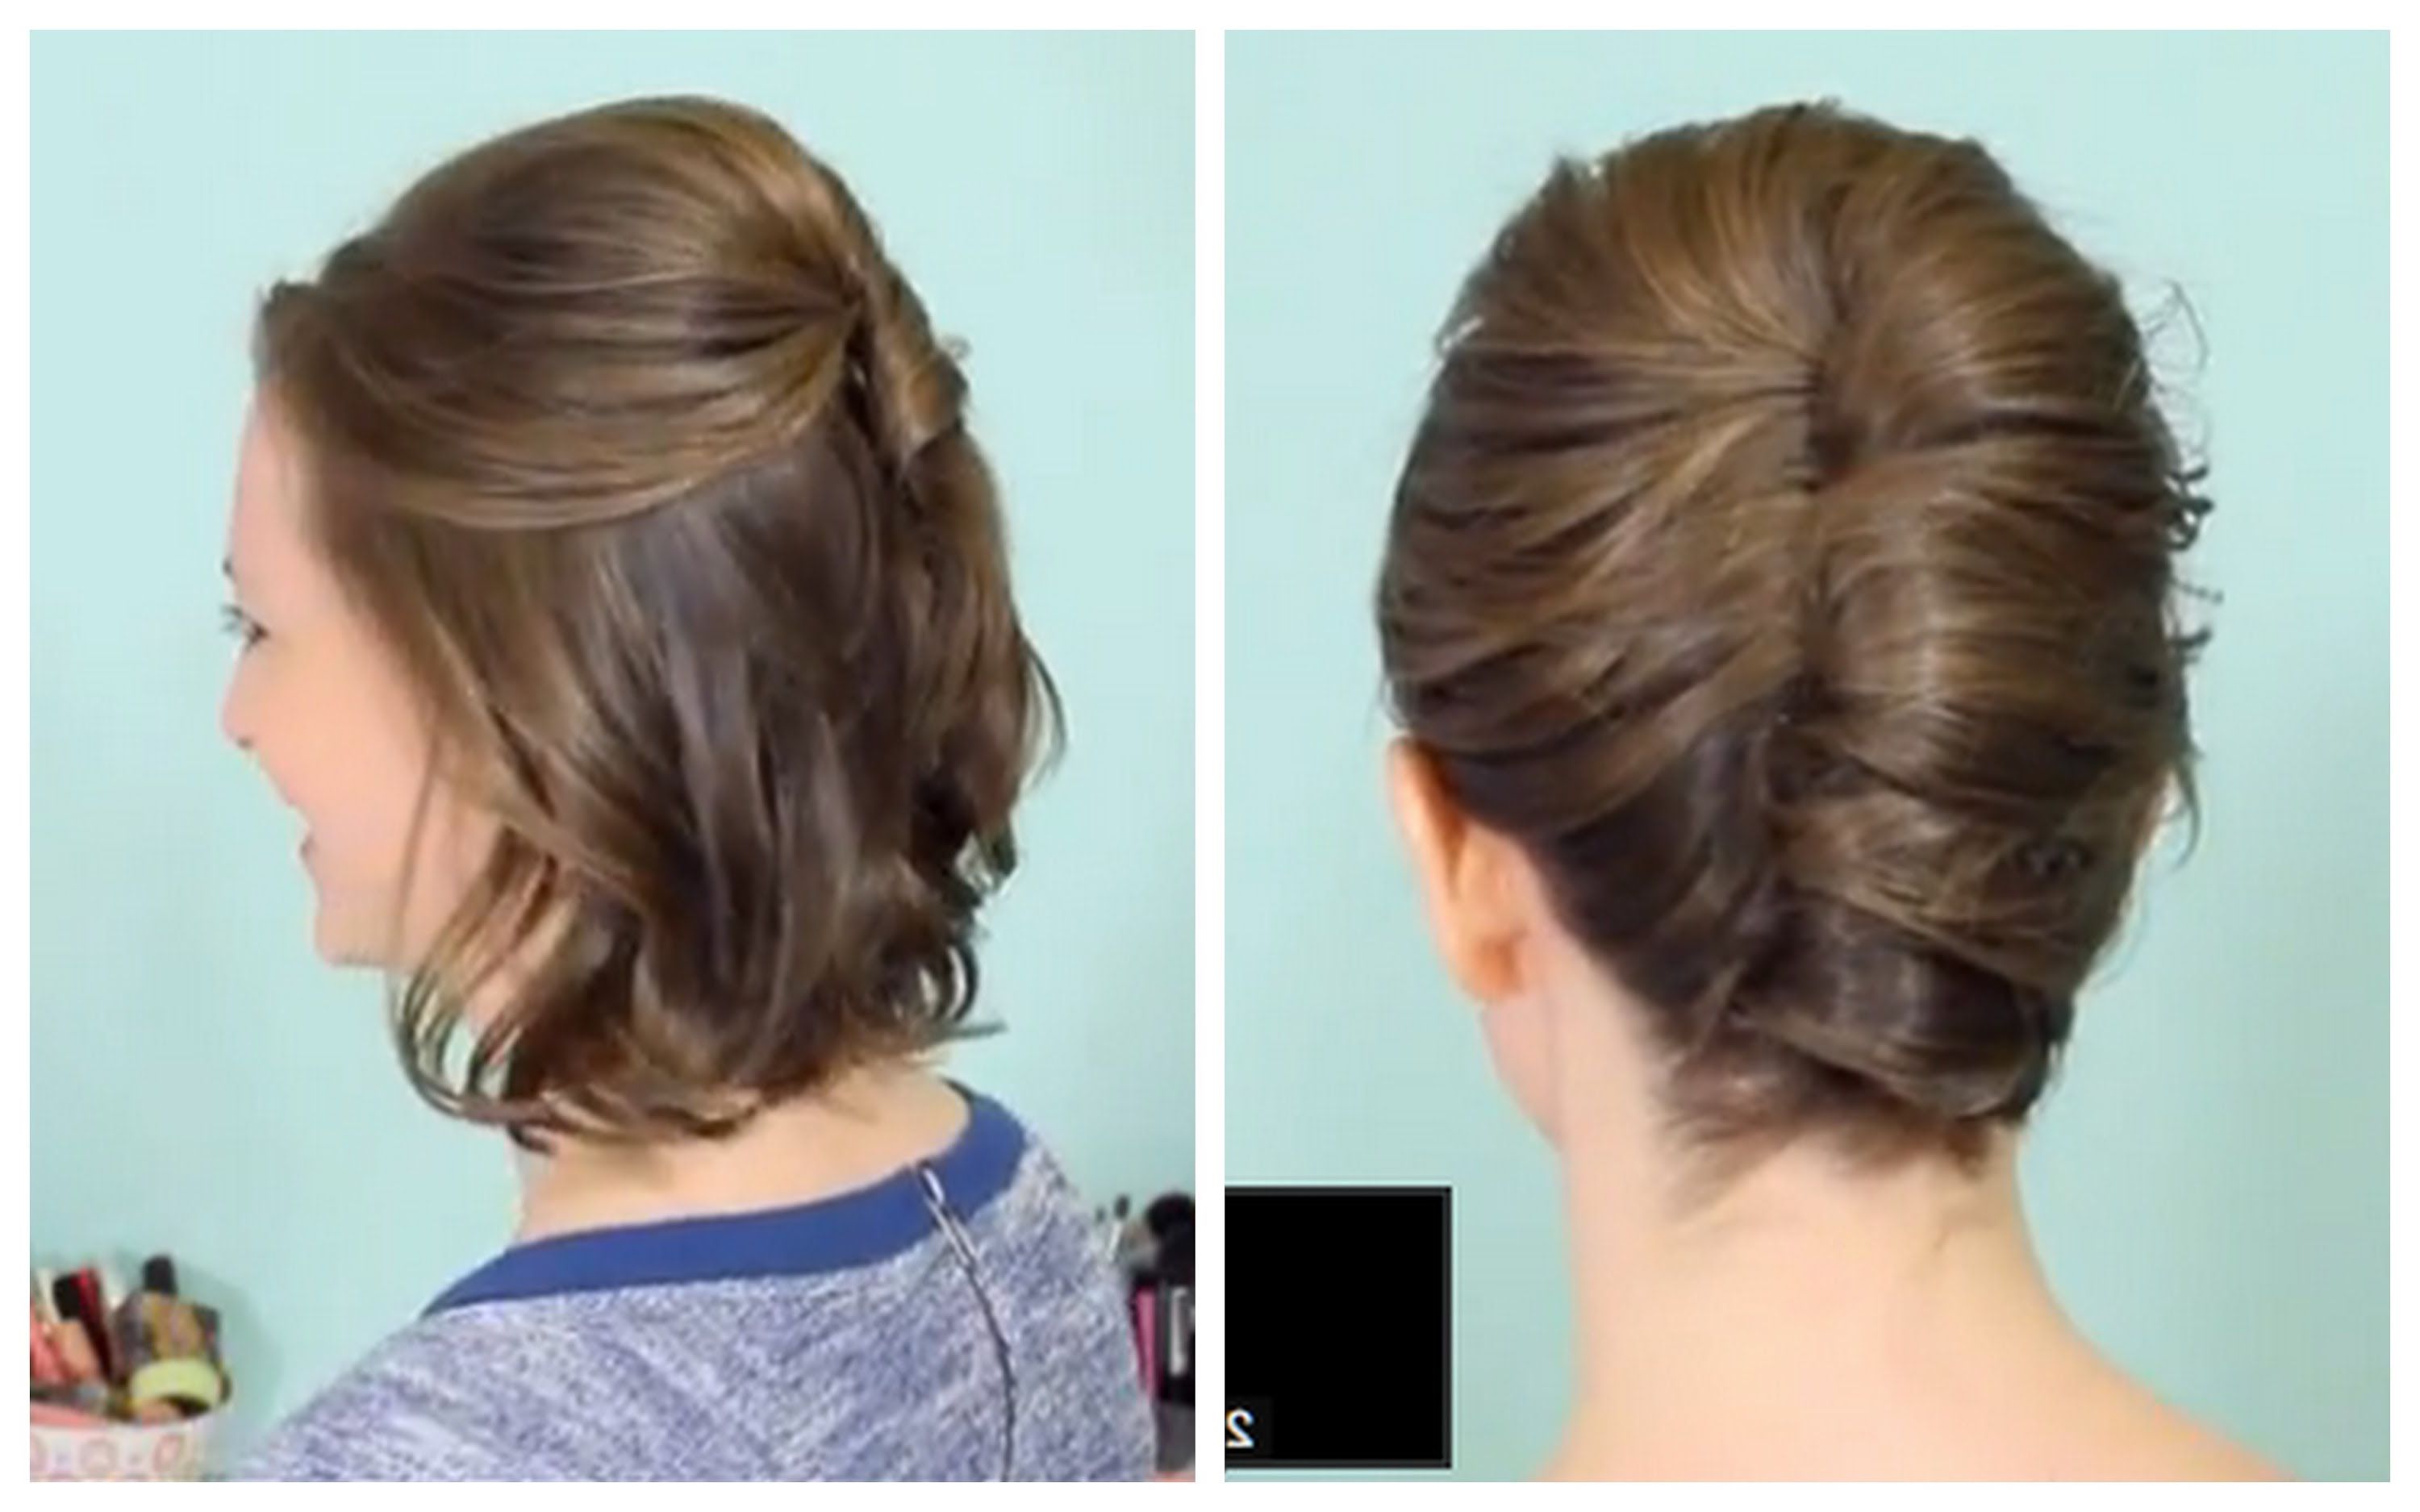 Most Up To Date Simple Pony Updo Hairstyles With A Twist With Regard To Short Hairstyle : French Twist Half Updo For Short Hair (View 16 of 20)